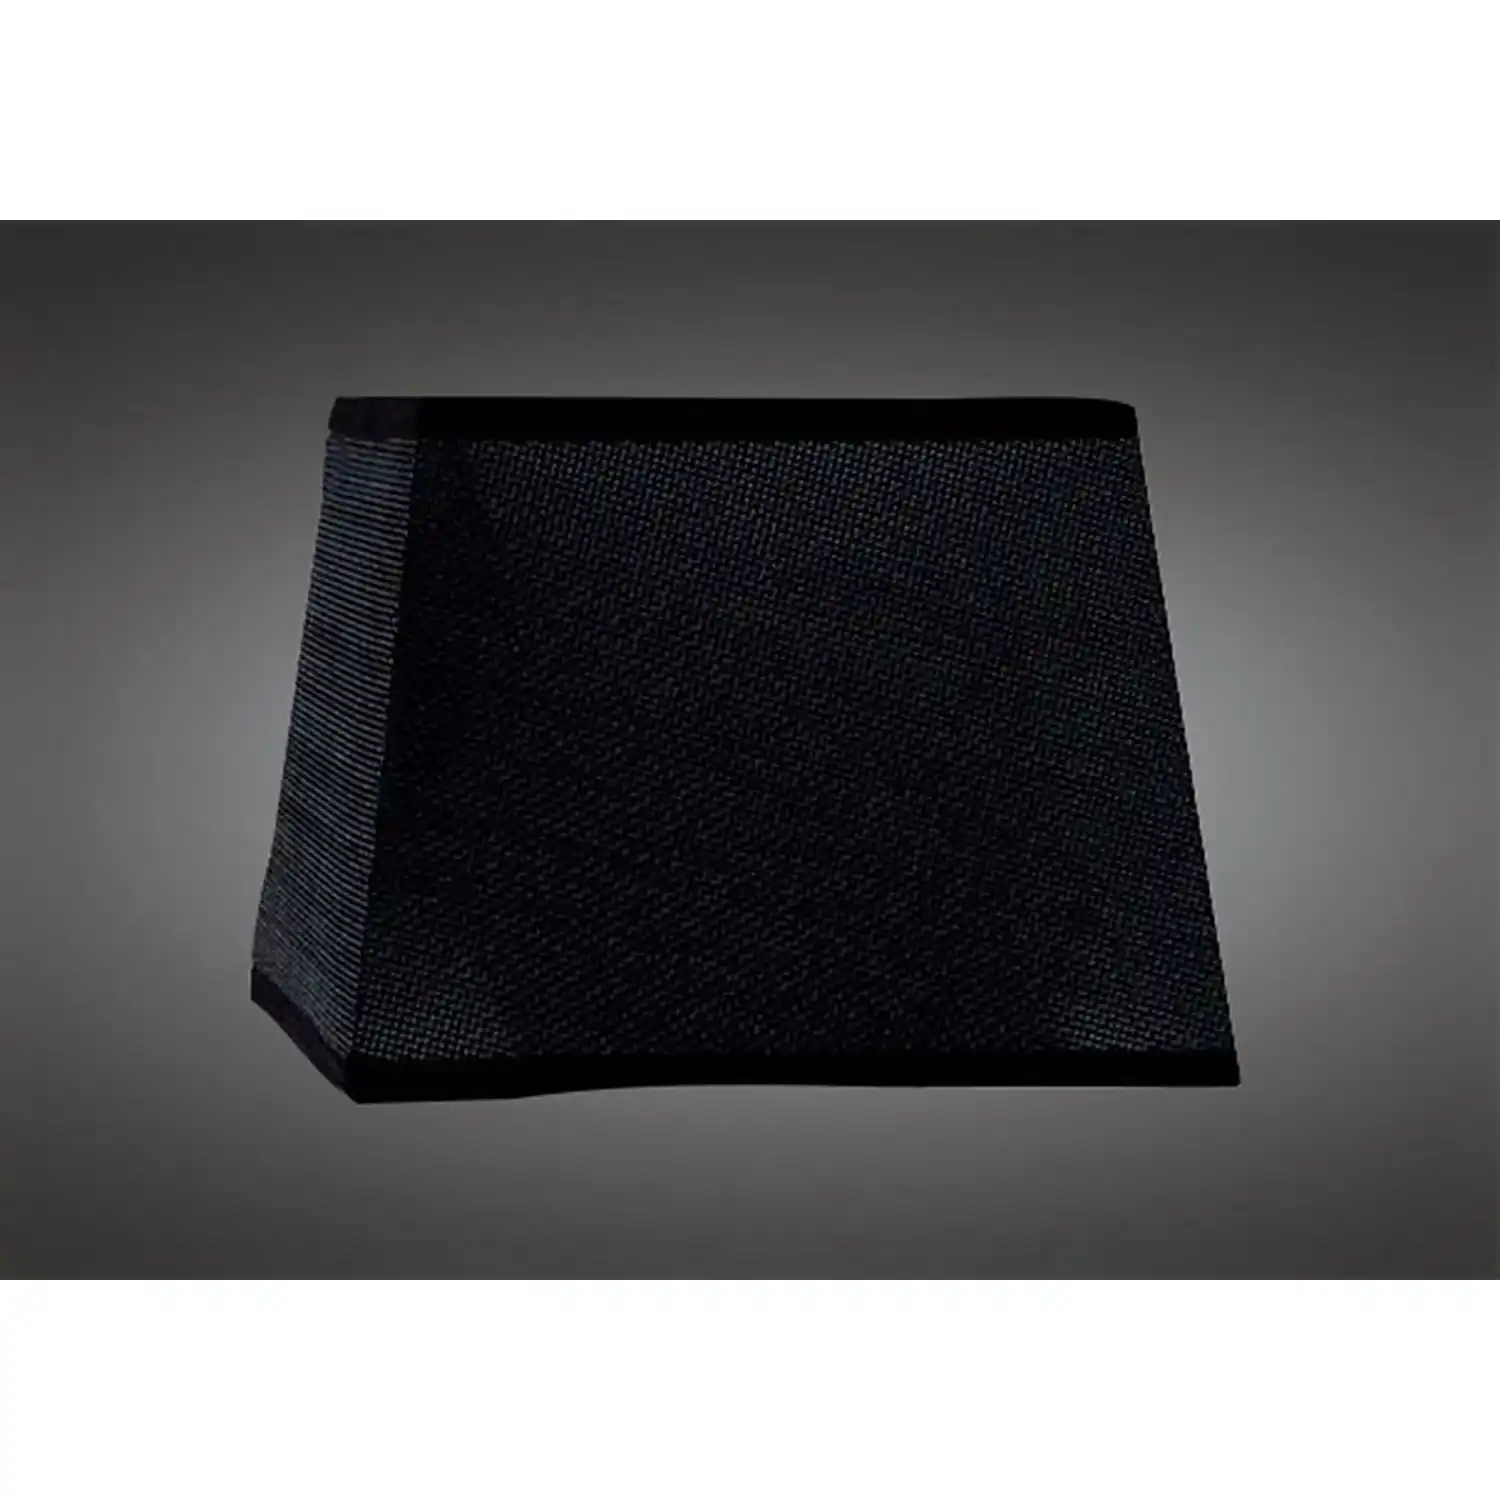 Habana Bkack Square Shade 355 355x250mm, Suitable for Floor Lamps